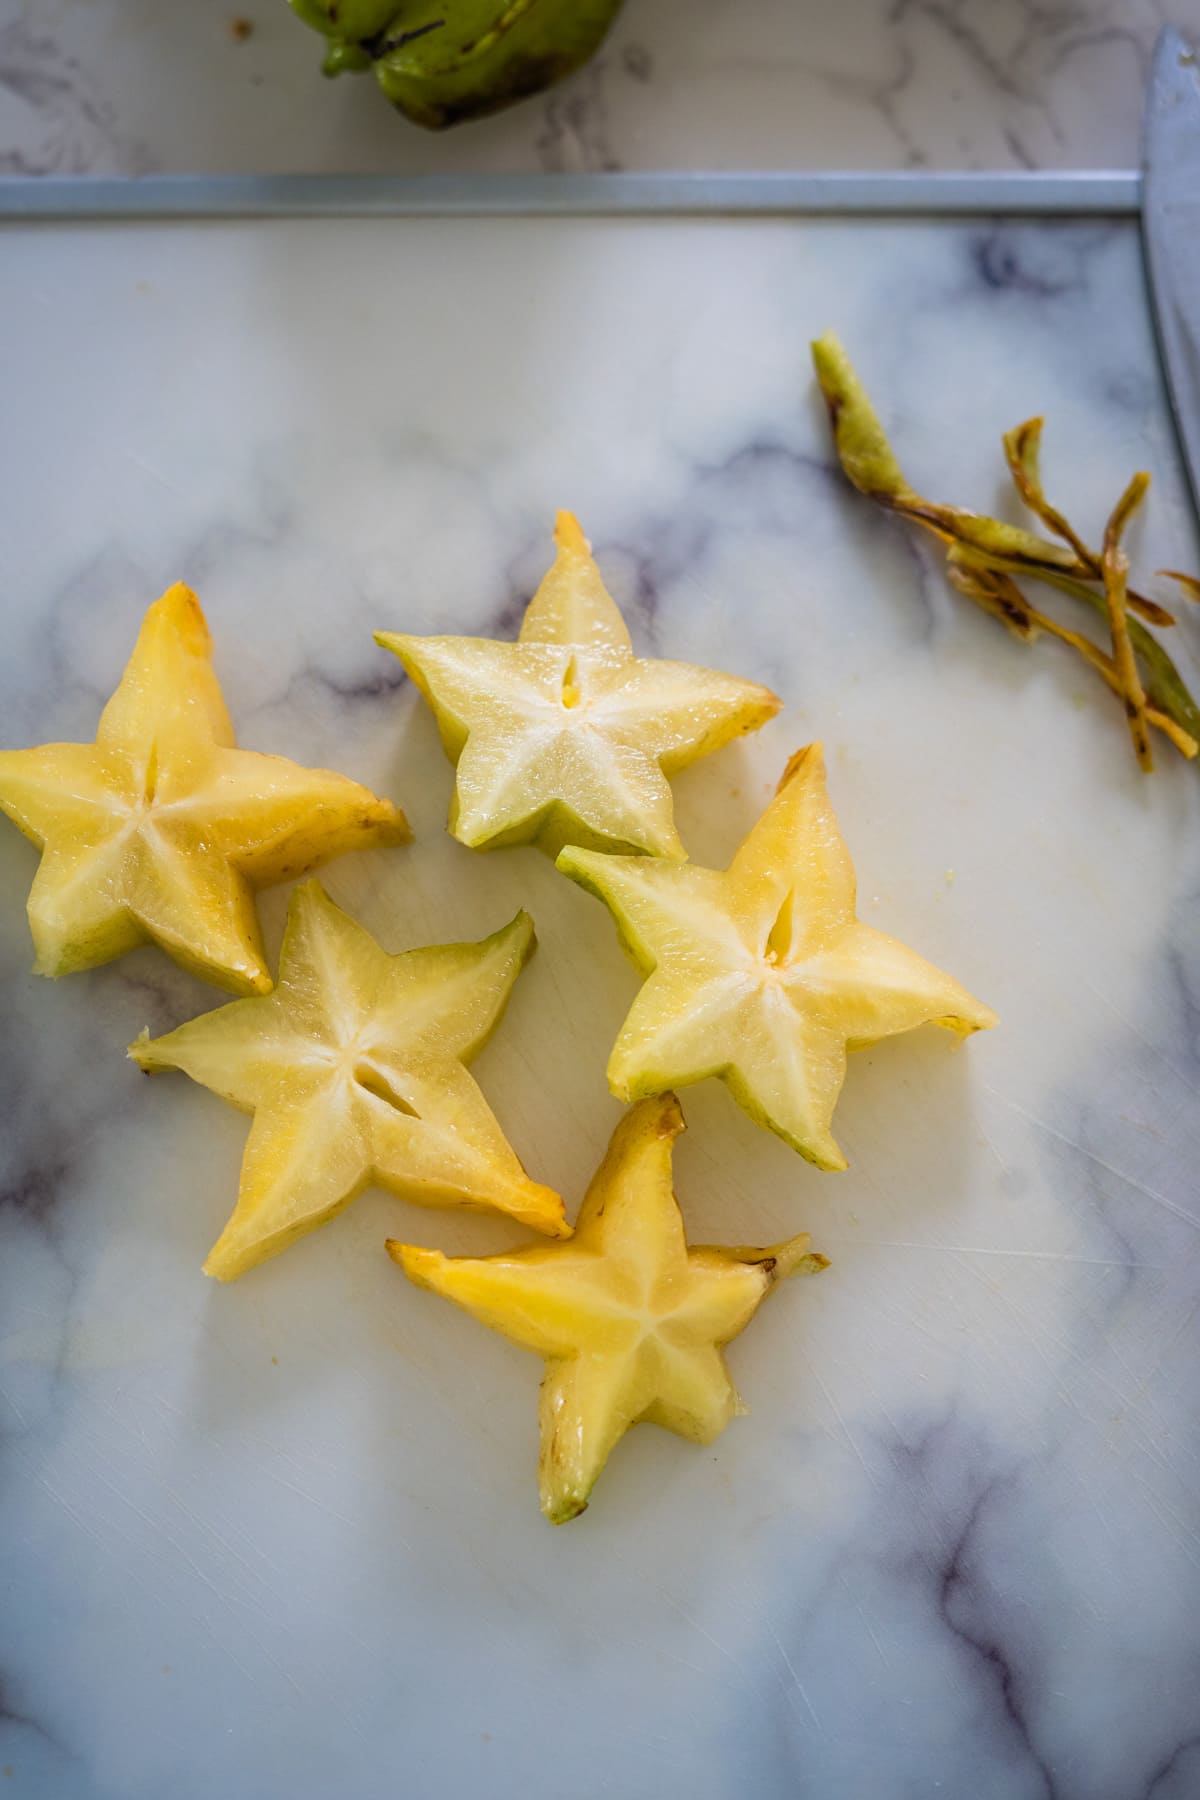 Sliced star fruit on a cutting board with a knife, perfect for making star fruit chutney.